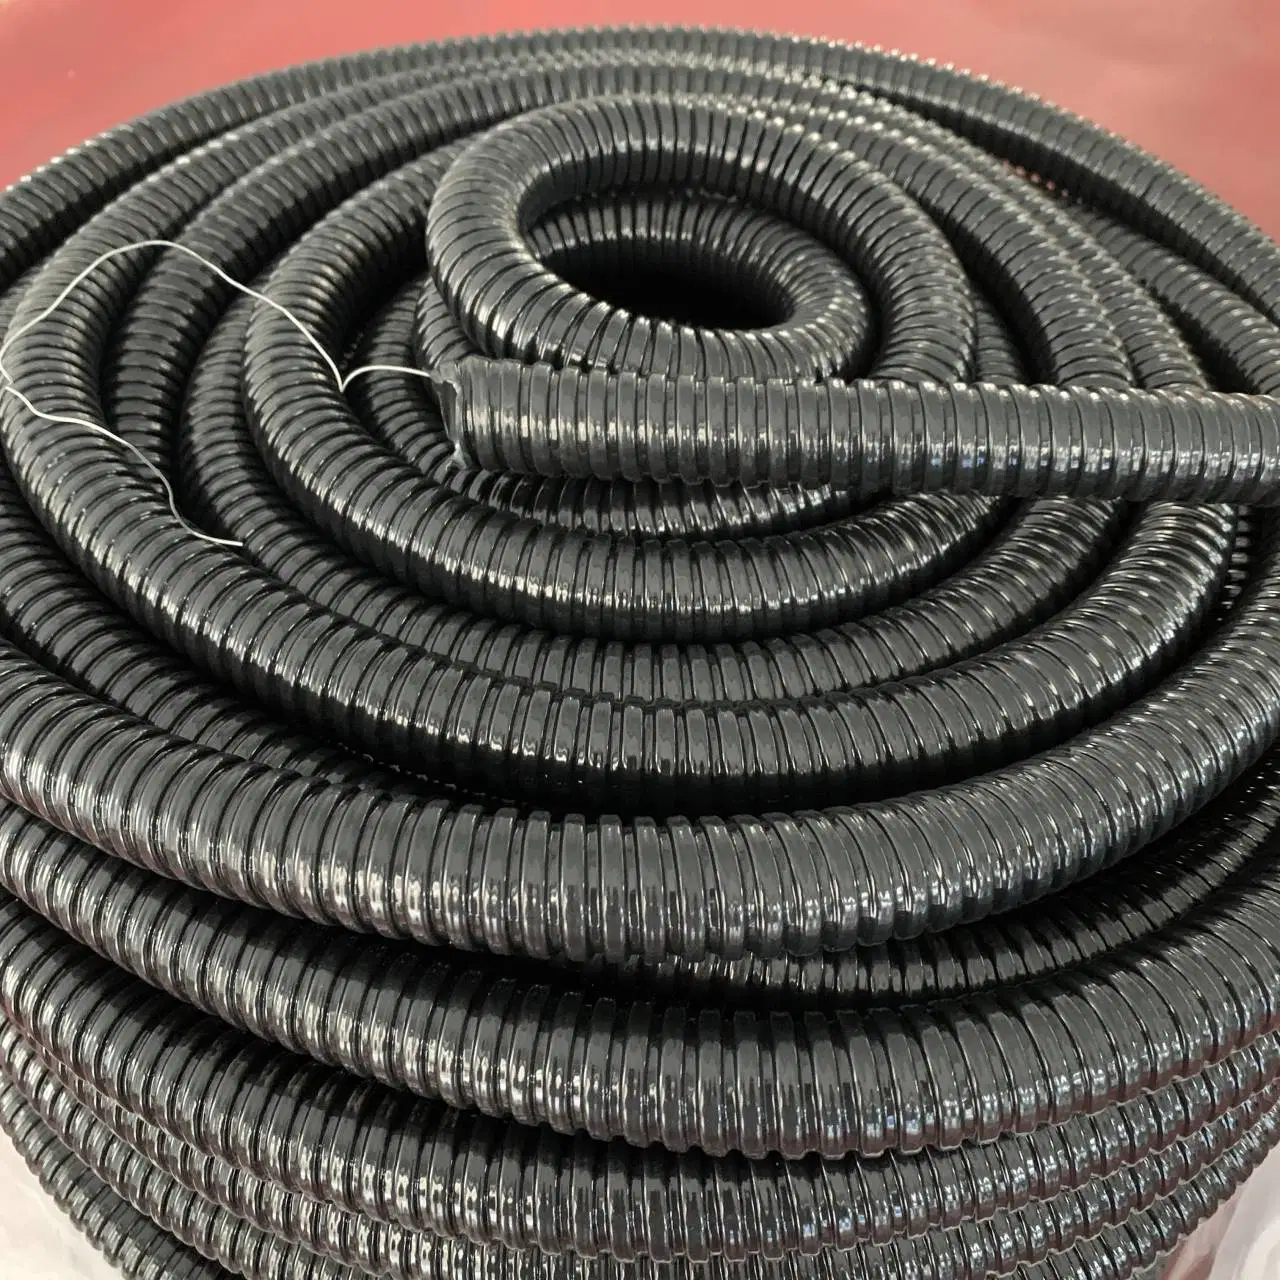 China Supplier PE Plastic Flexible Corrugated Tube for Electrical Wire